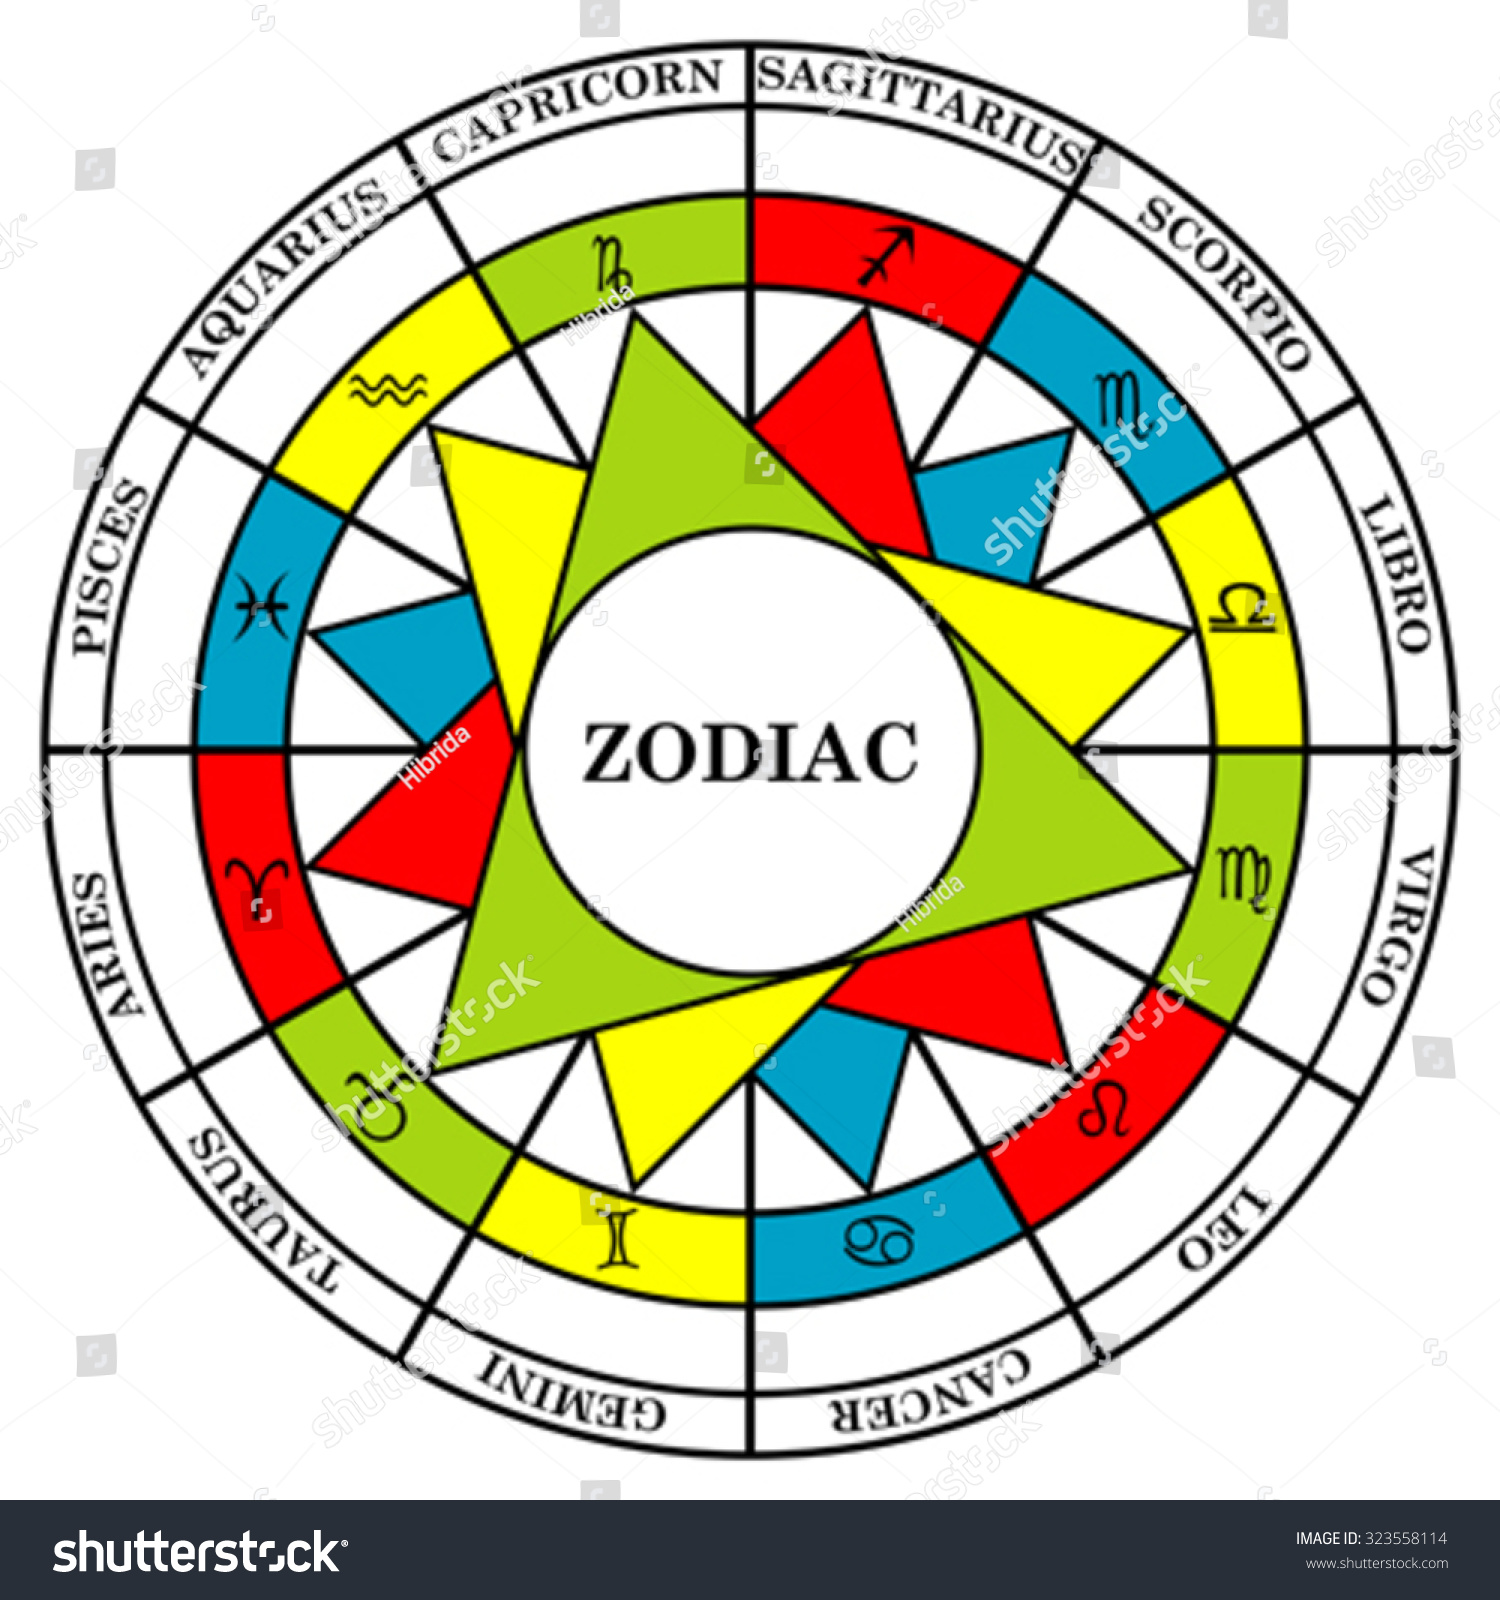 Astrology Signs Of The Zodiac Divided Into Elements Fire, Water, Air ...